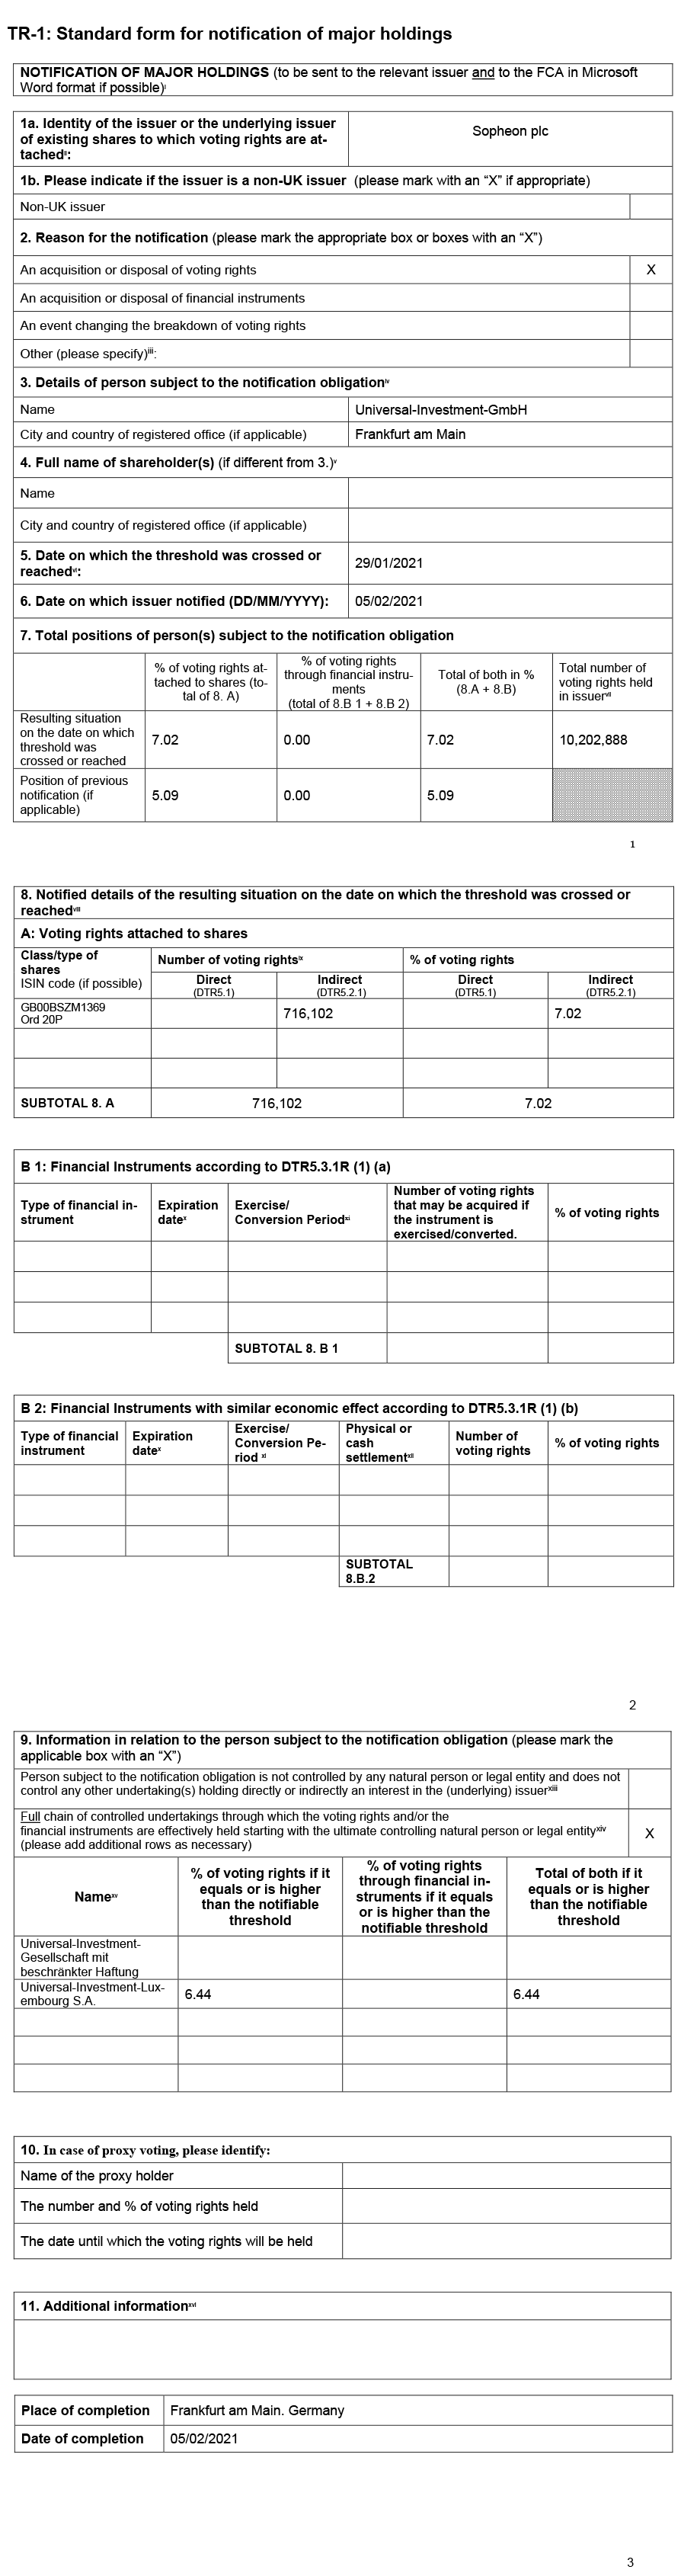 Standard Form for Notification of Major Holdings